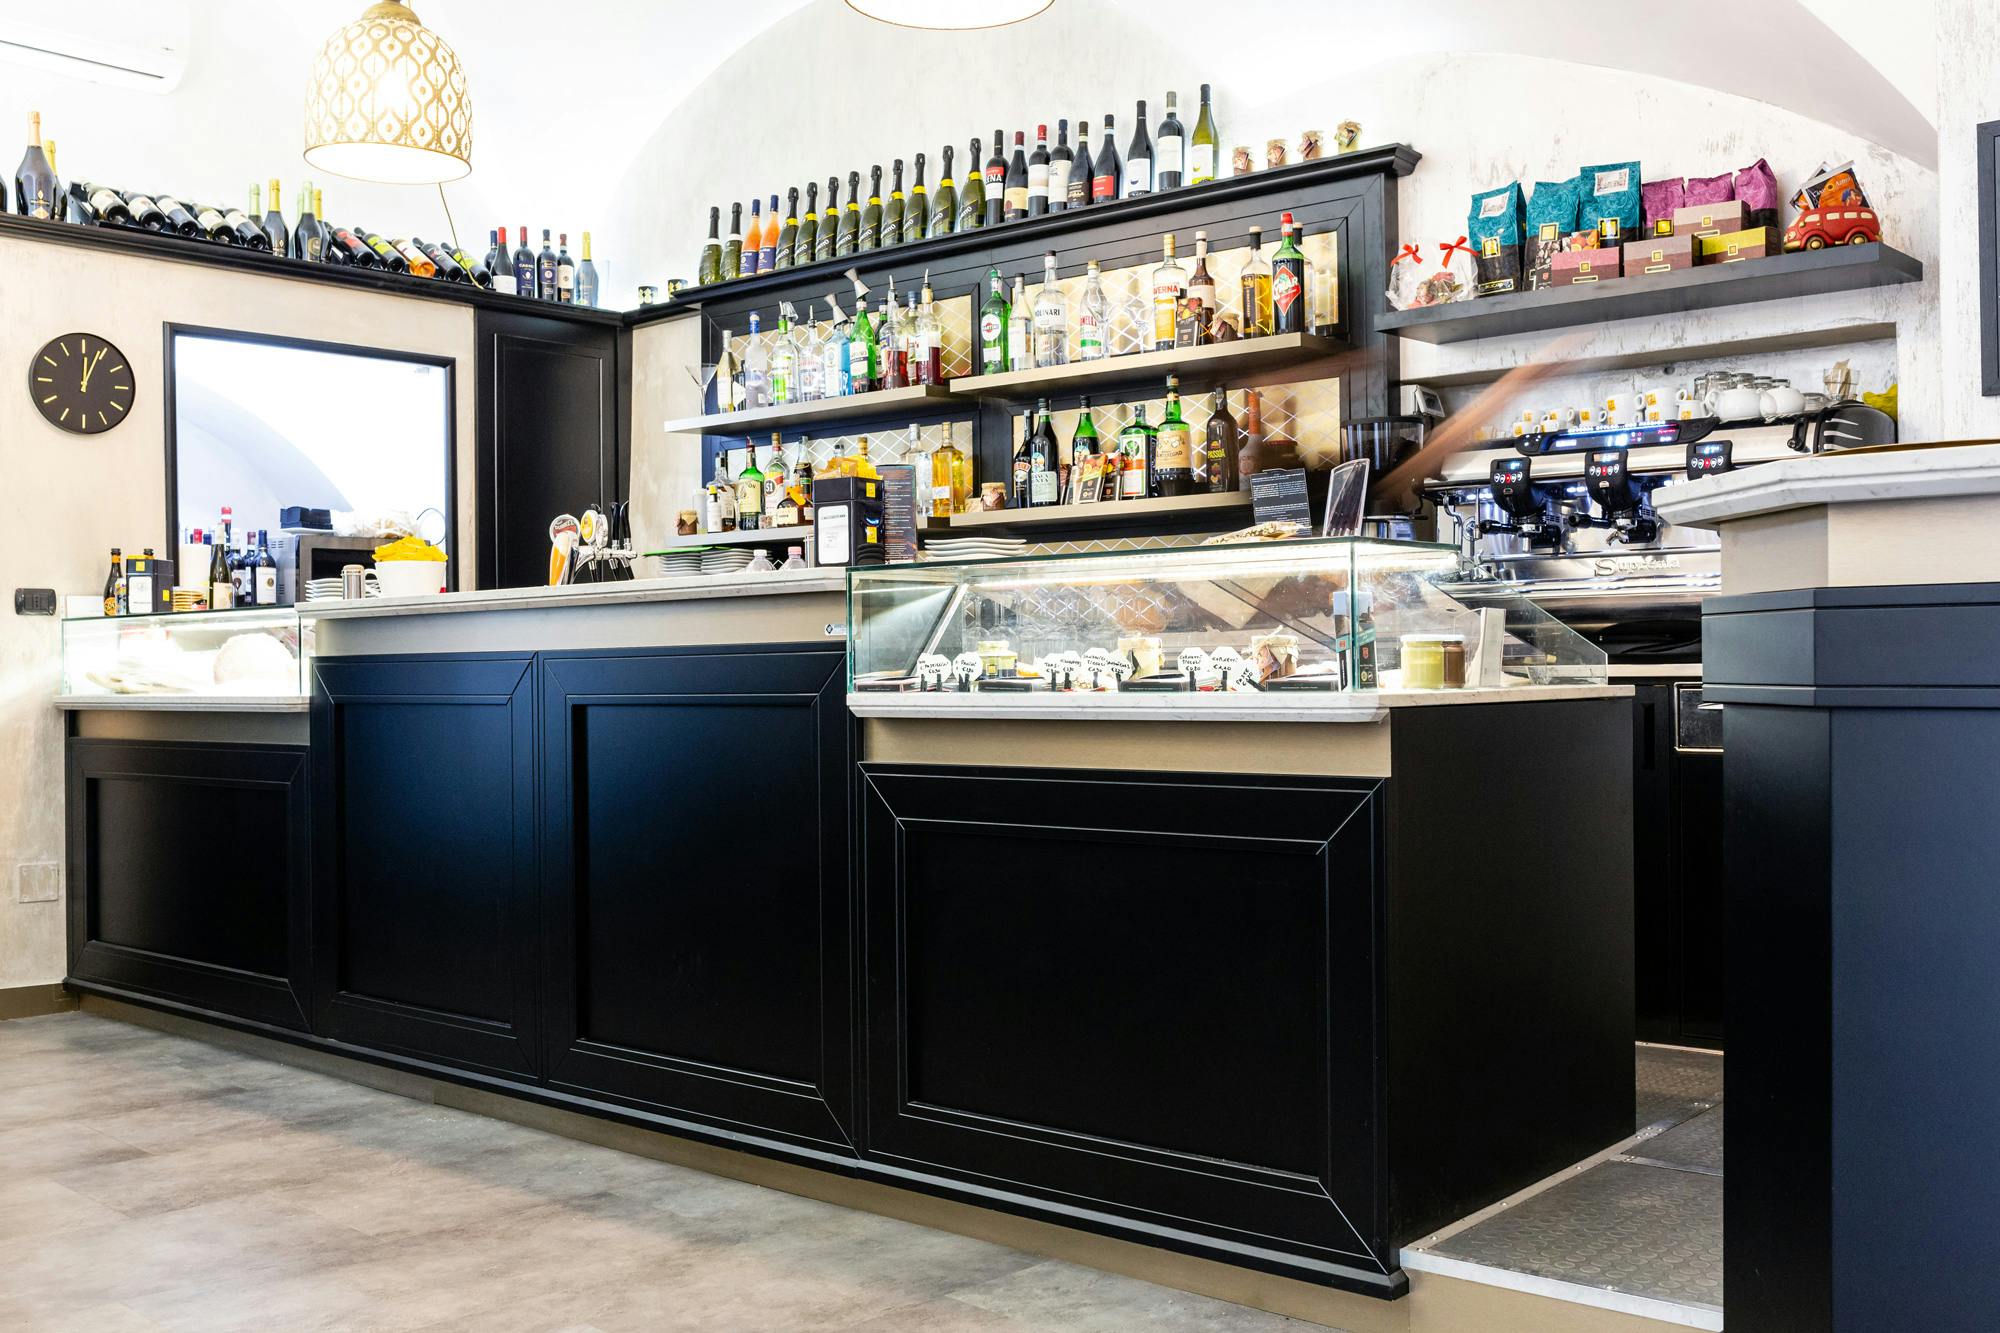 Numéro d'image 52 de la section actuelle de A century old building gets a new lease of life as one of Oslo’s most vibrant hotels thanks to Silestone de Cosentino France